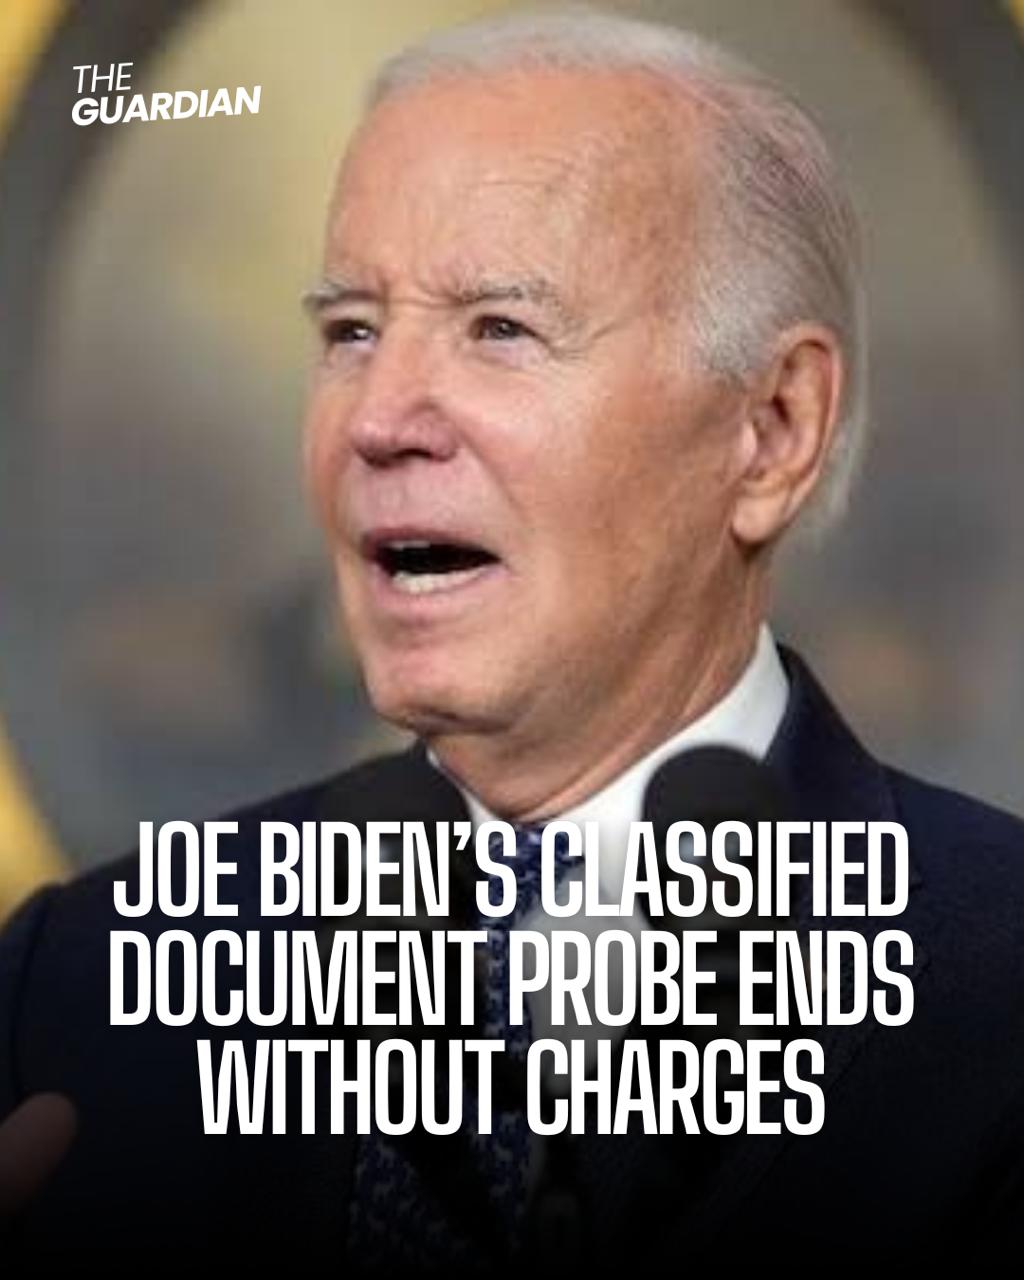 Democrats are supporting President Joe Biden after a report on his handling of classified papers raised concerns regarding his age and mental fitness.